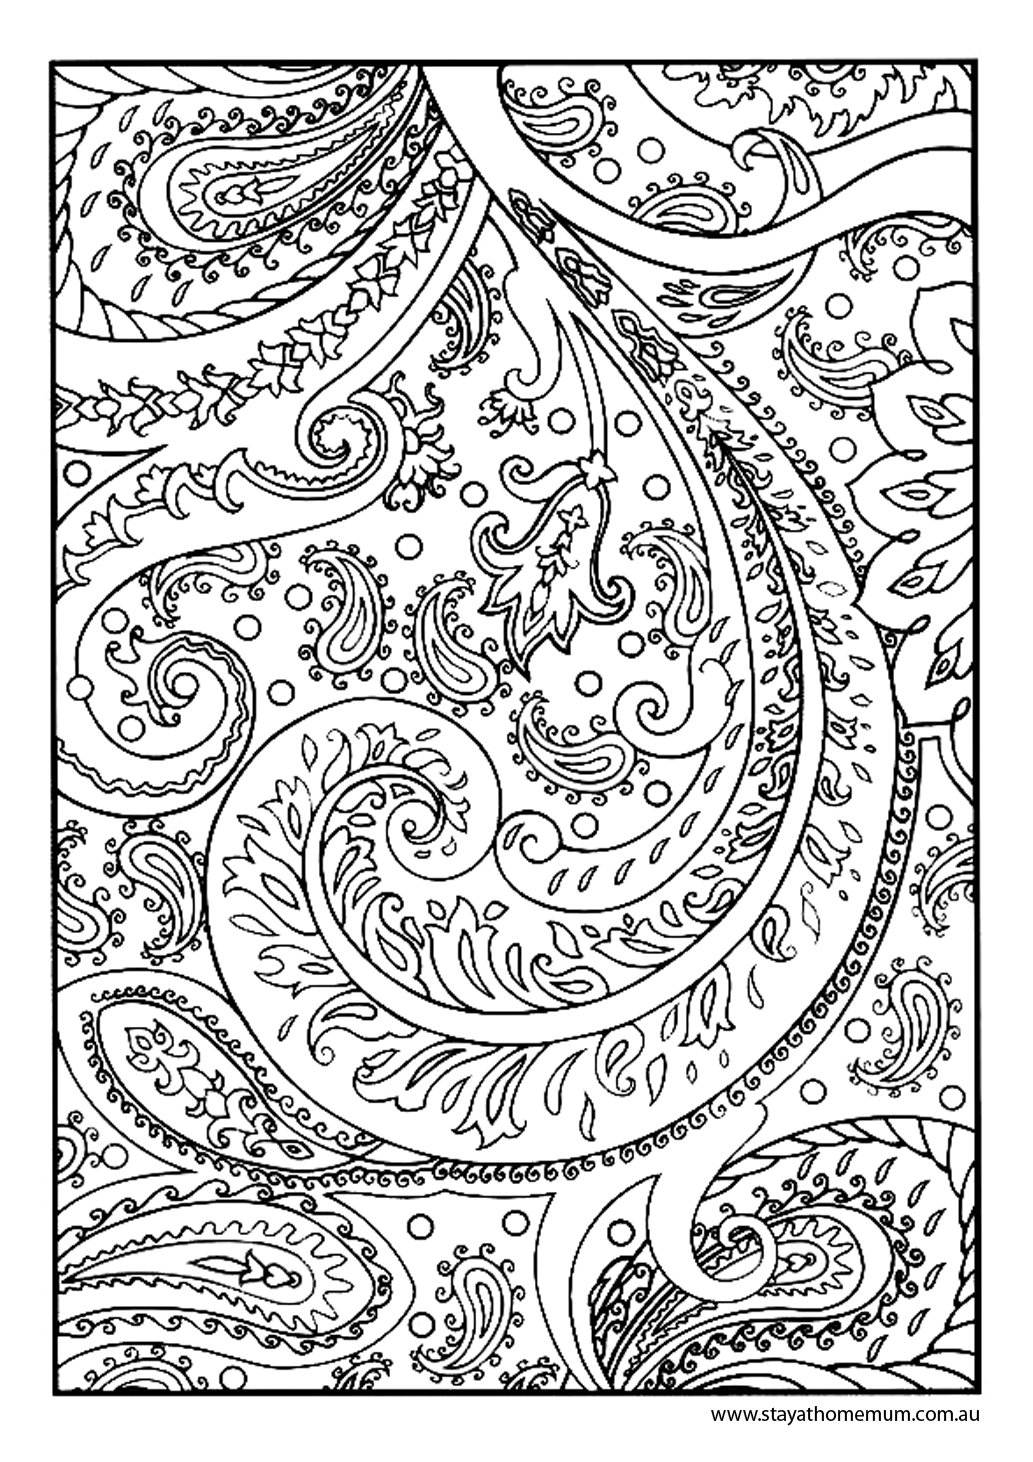 Download Printable Colouring Pages for Kids and Adults